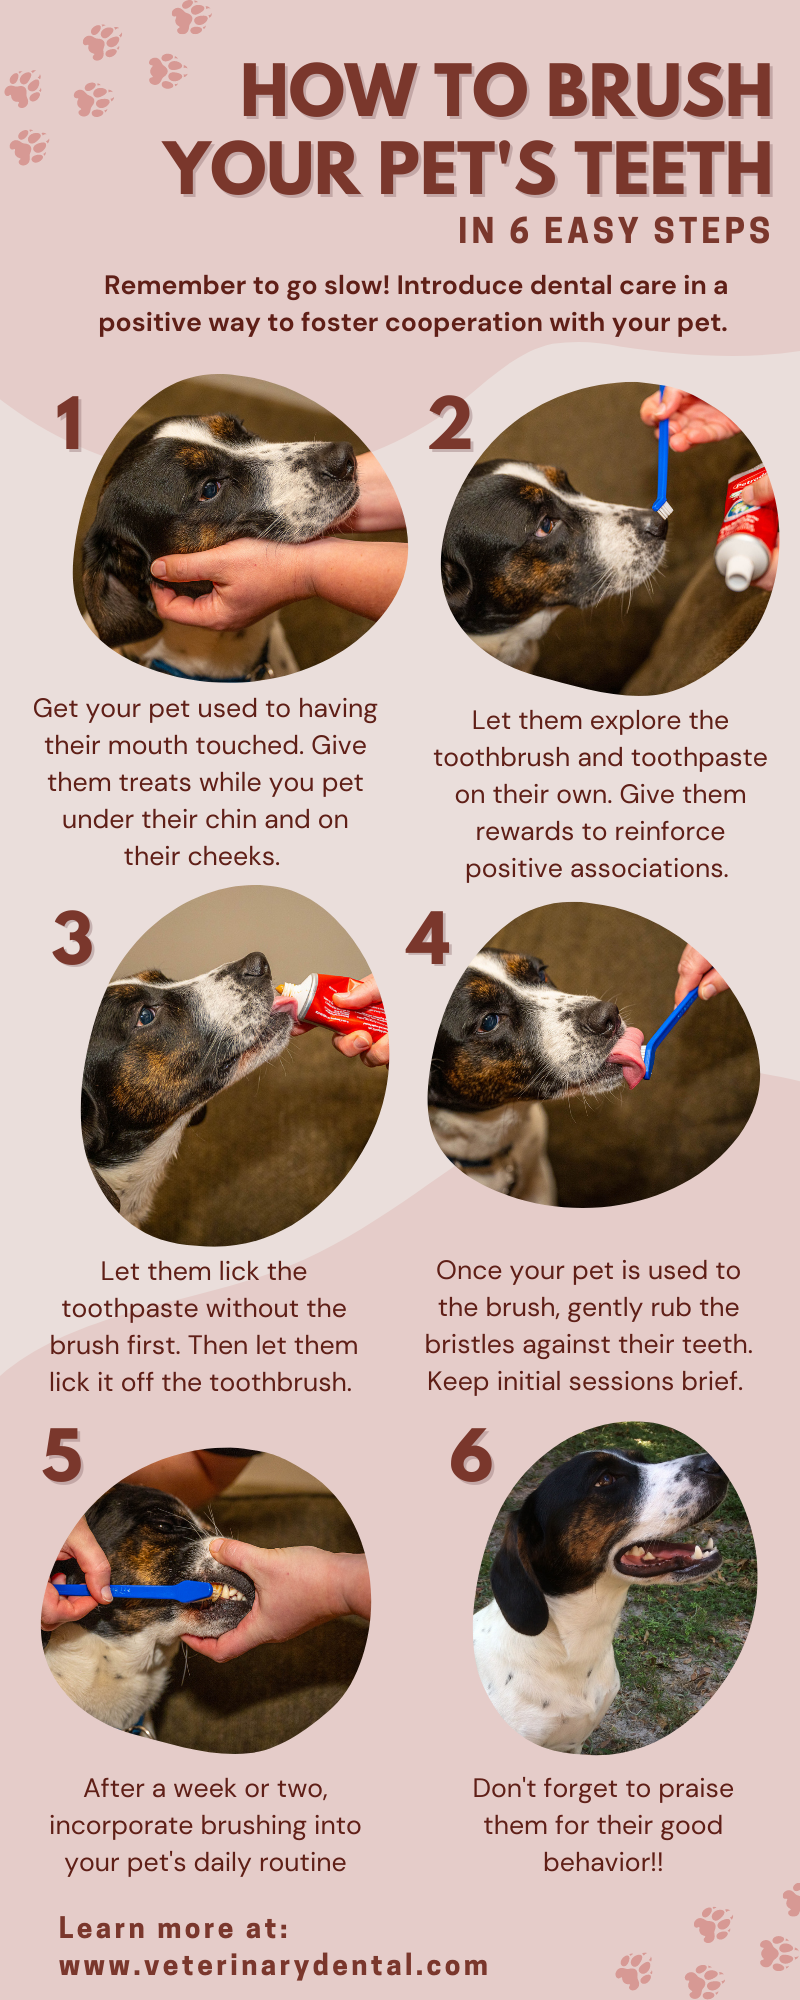 How to Brush Your Pet's Teeth 